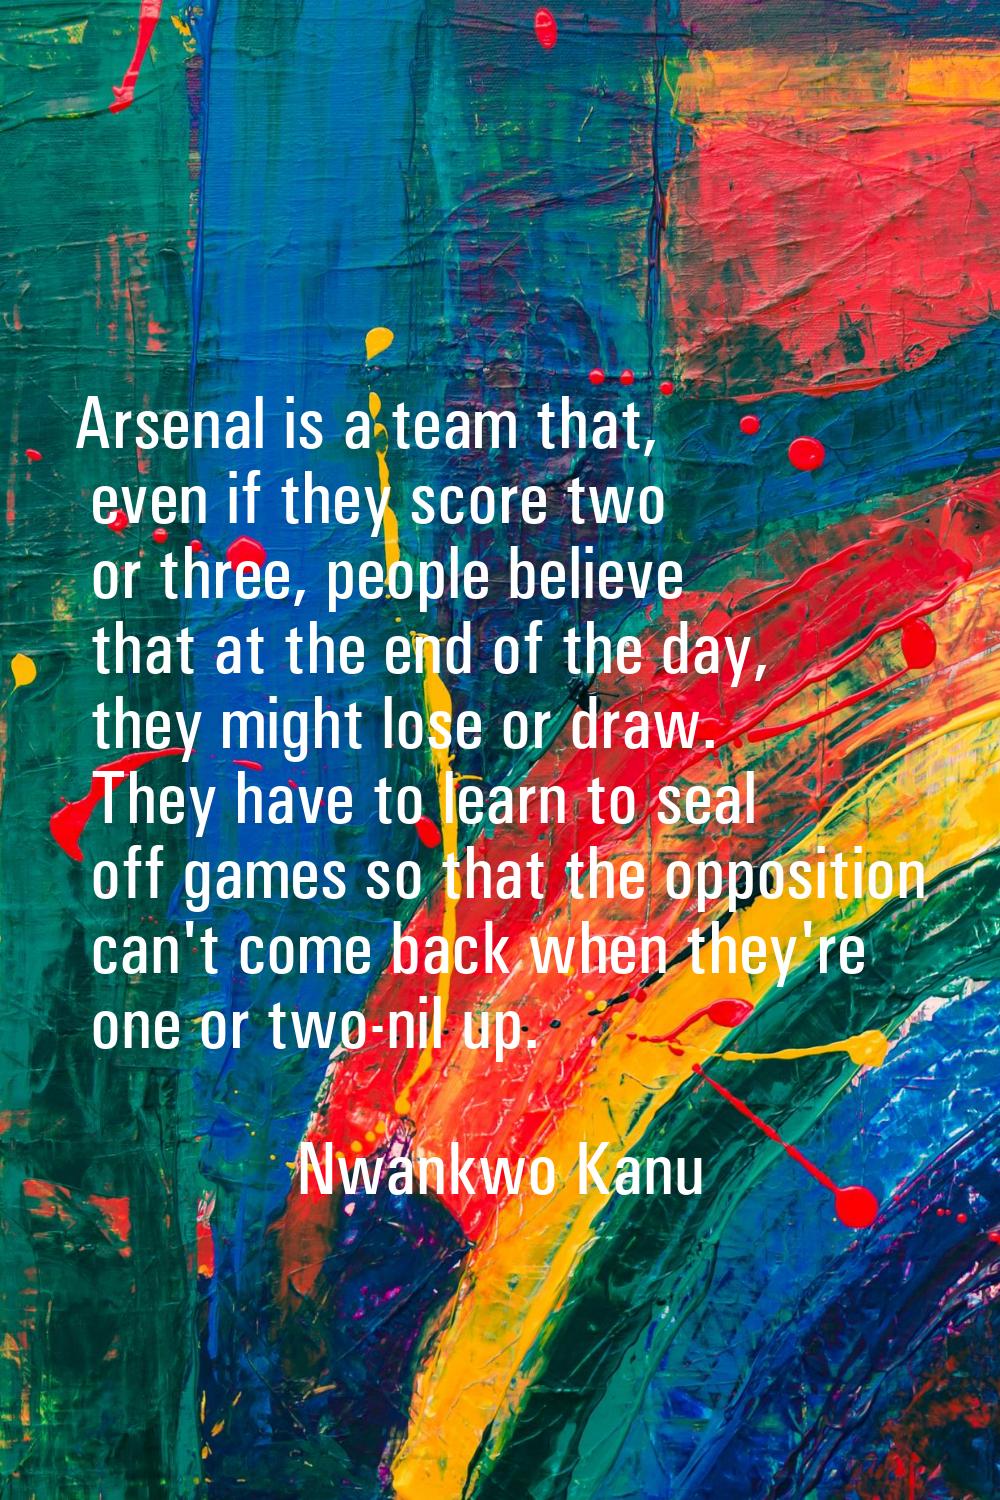 Arsenal is a team that, even if they score two or three, people believe that at the end of the day,